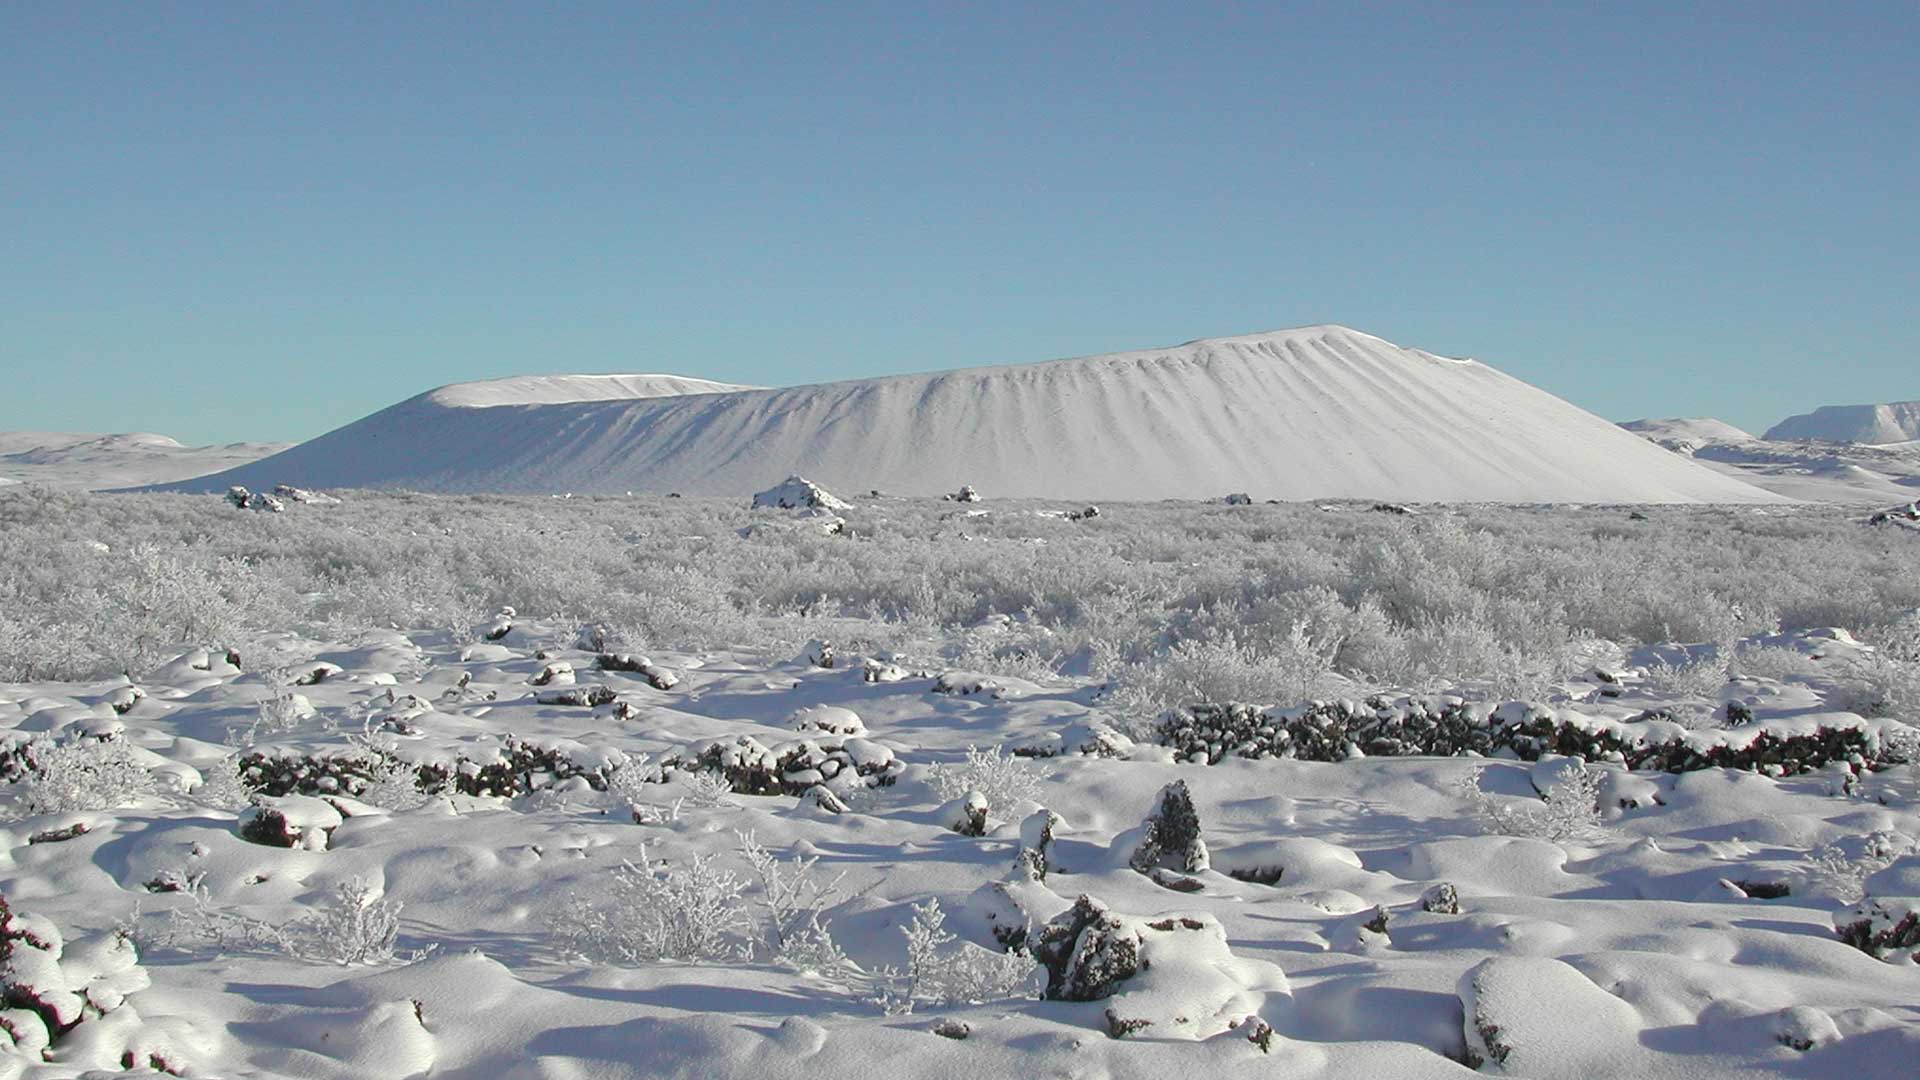 Hverfjall/Hverfell during the Winter